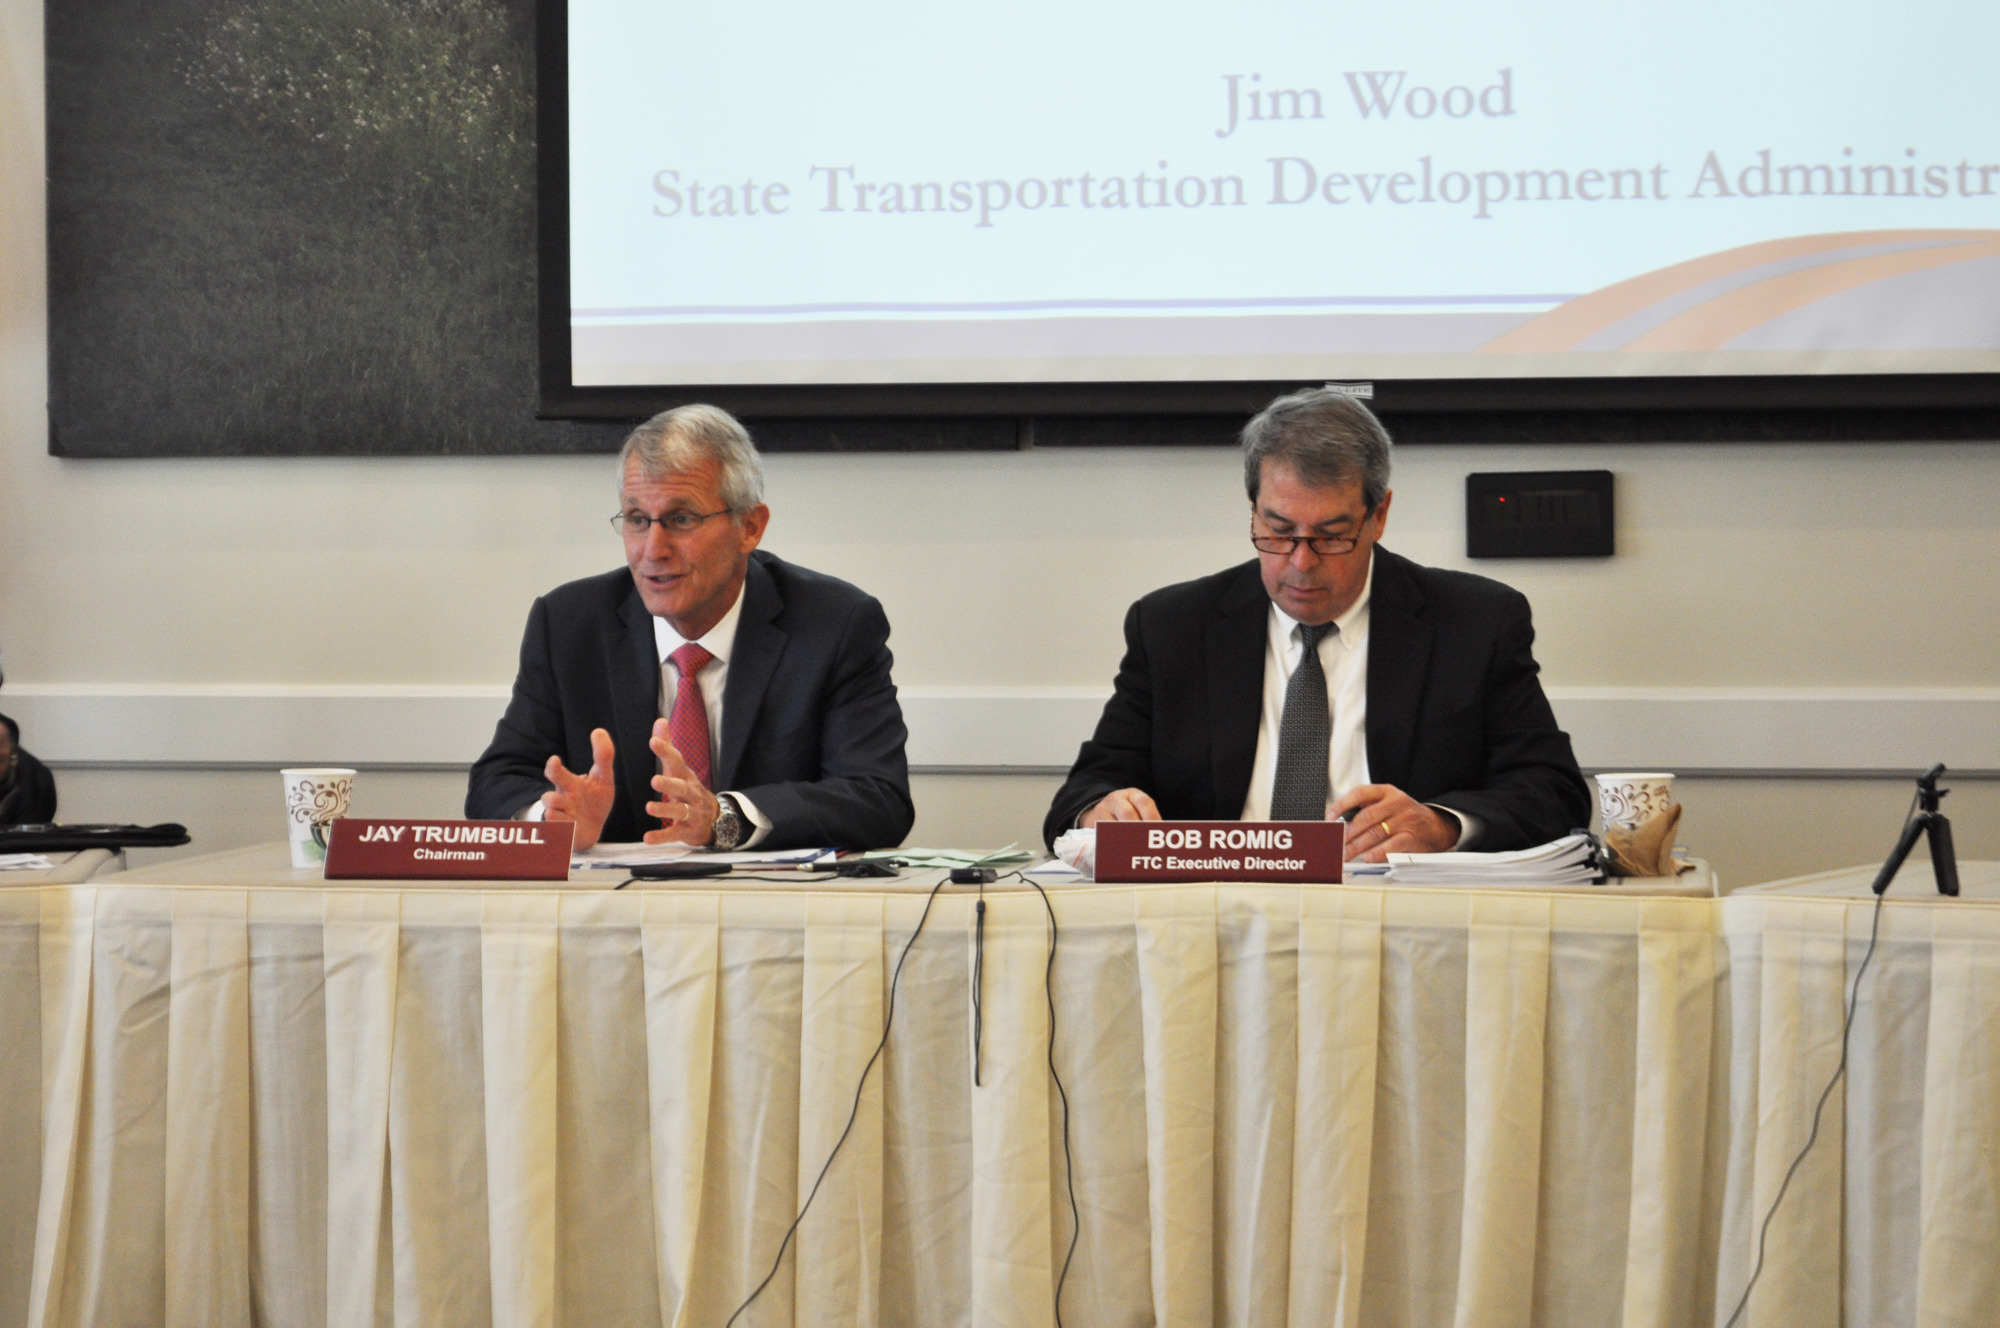 Chairman Jay Trumbull welcomes guests, as he sits by FTC Executive Director Bob Romig.